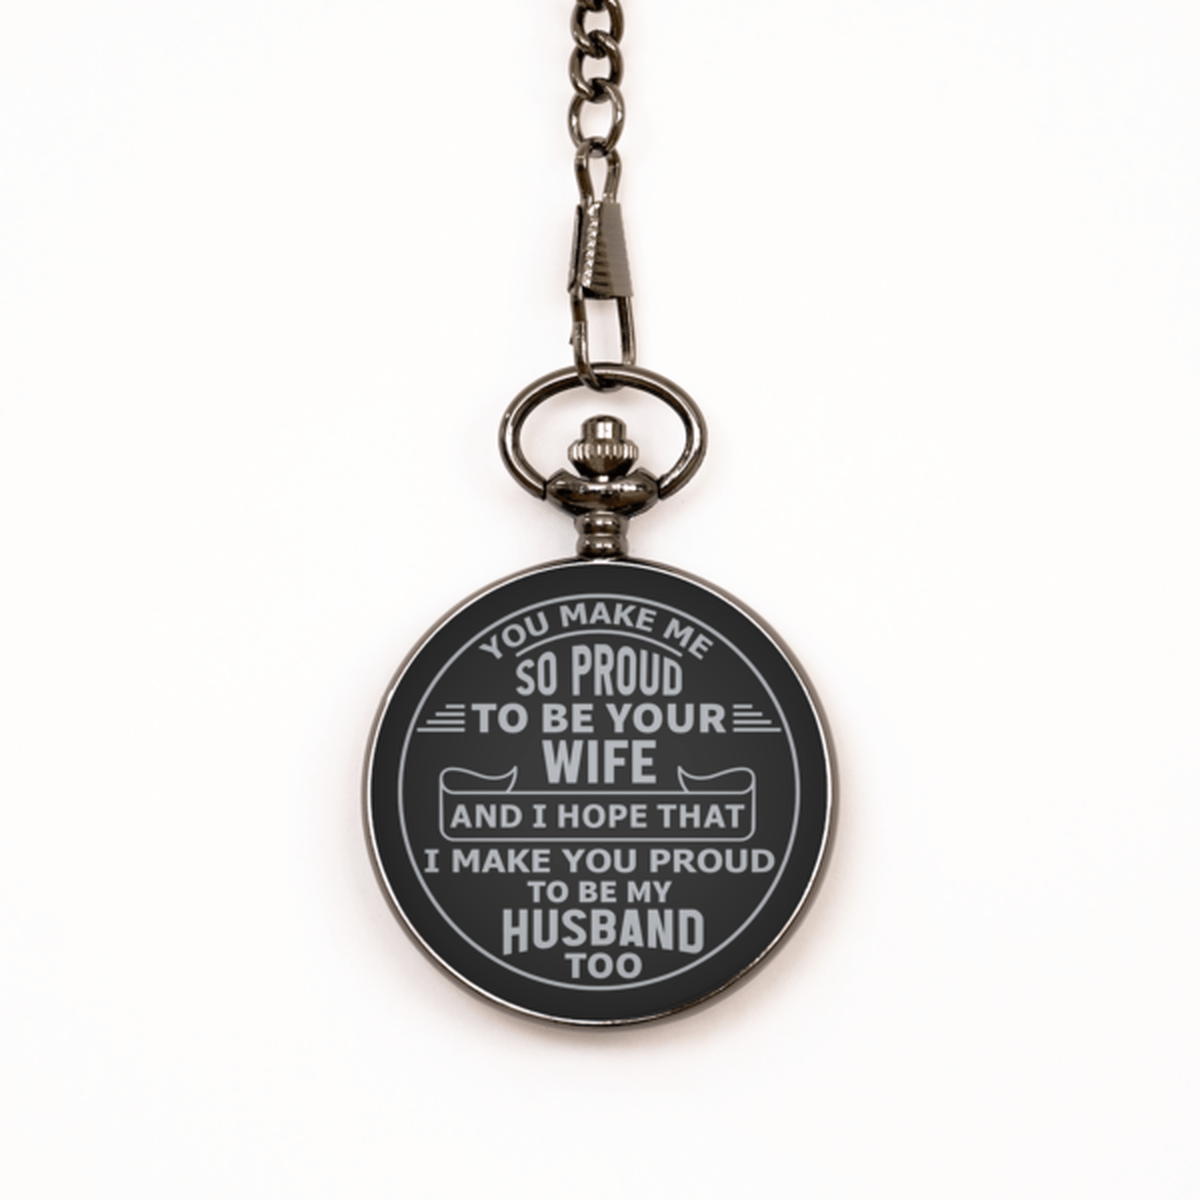 Proud to Be Your Wife Black Pocket Watch - Gift for Husband - Gift from Wife - Anniversary, Wedding, Valentine's Day, Birthday Gift